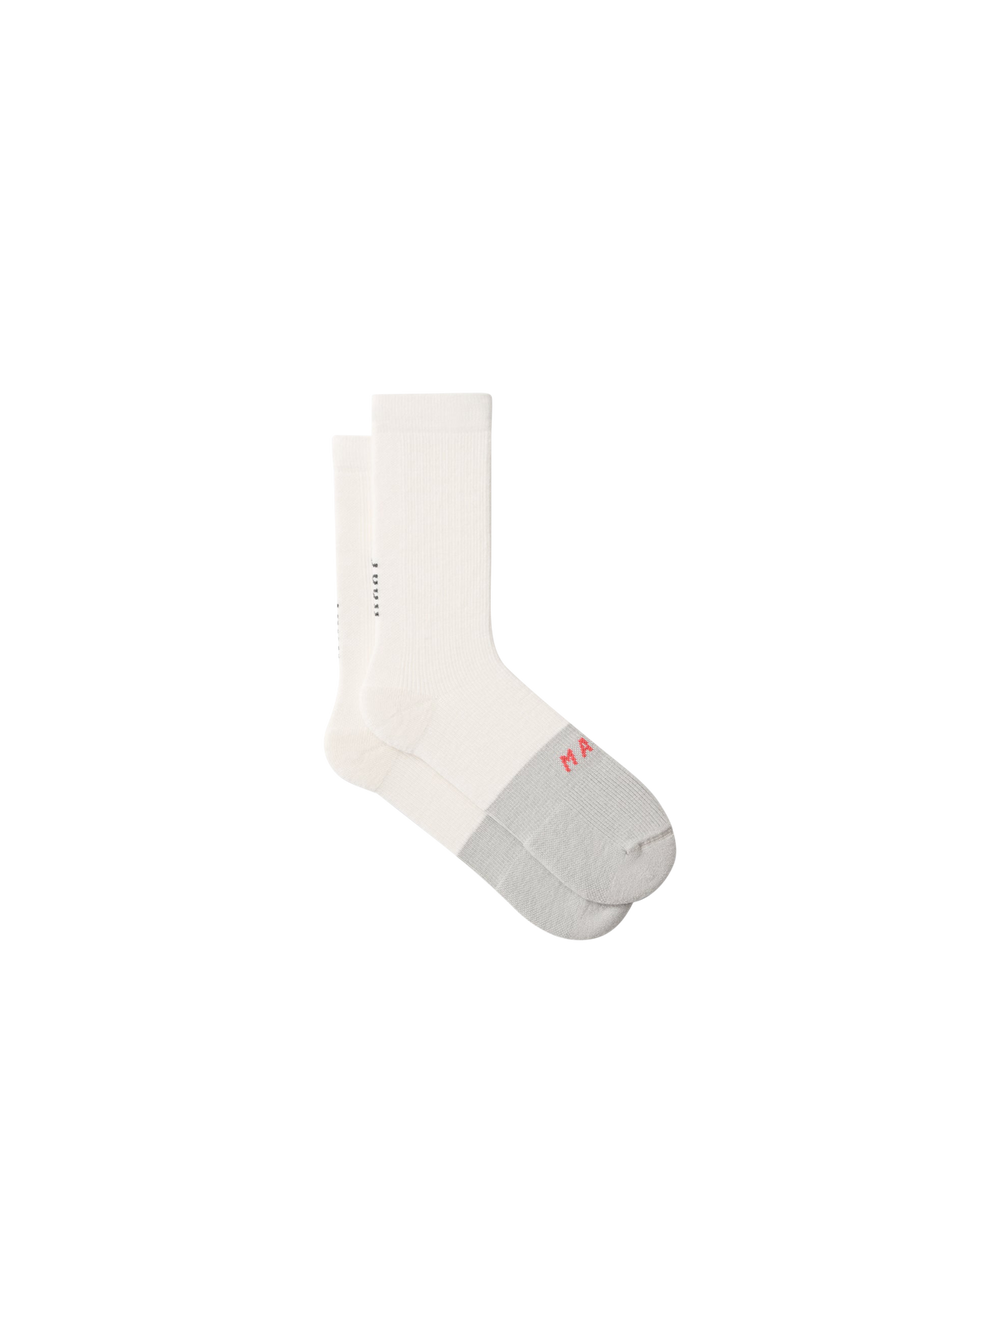 Product Image for Division Merino Sock